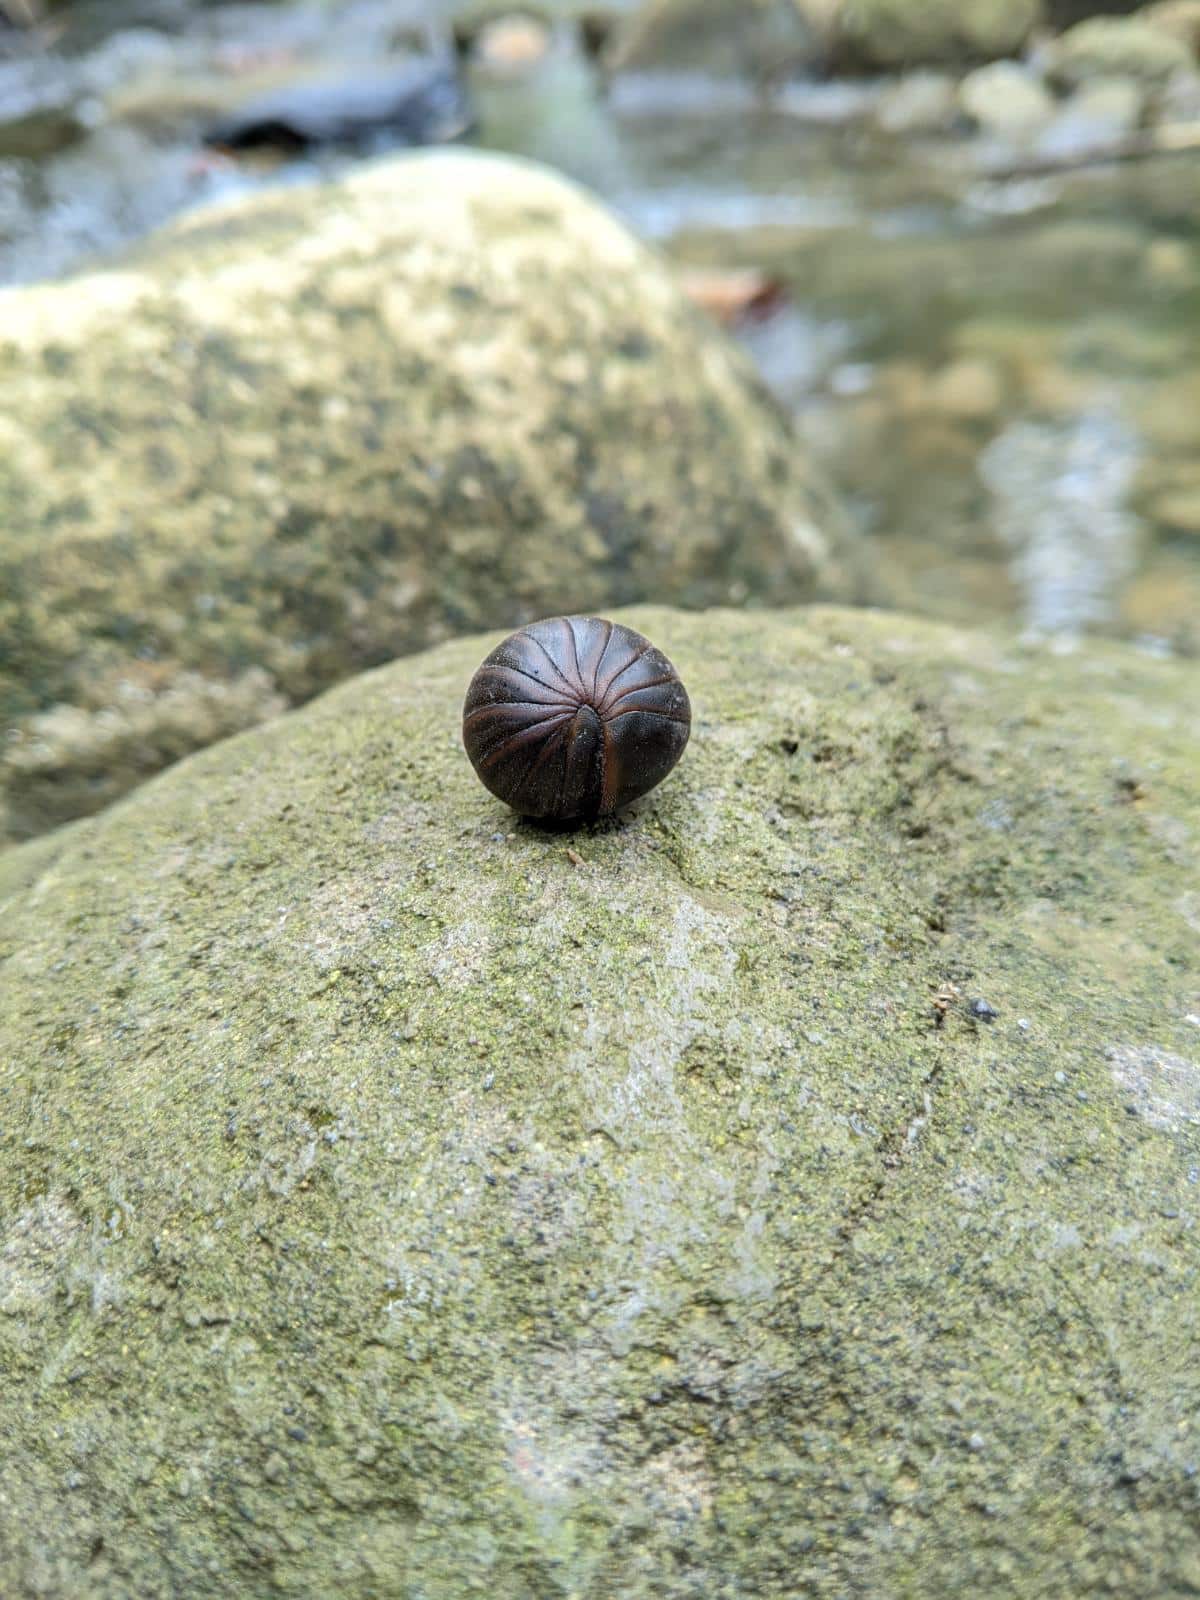 A pillbug rolled into a ball